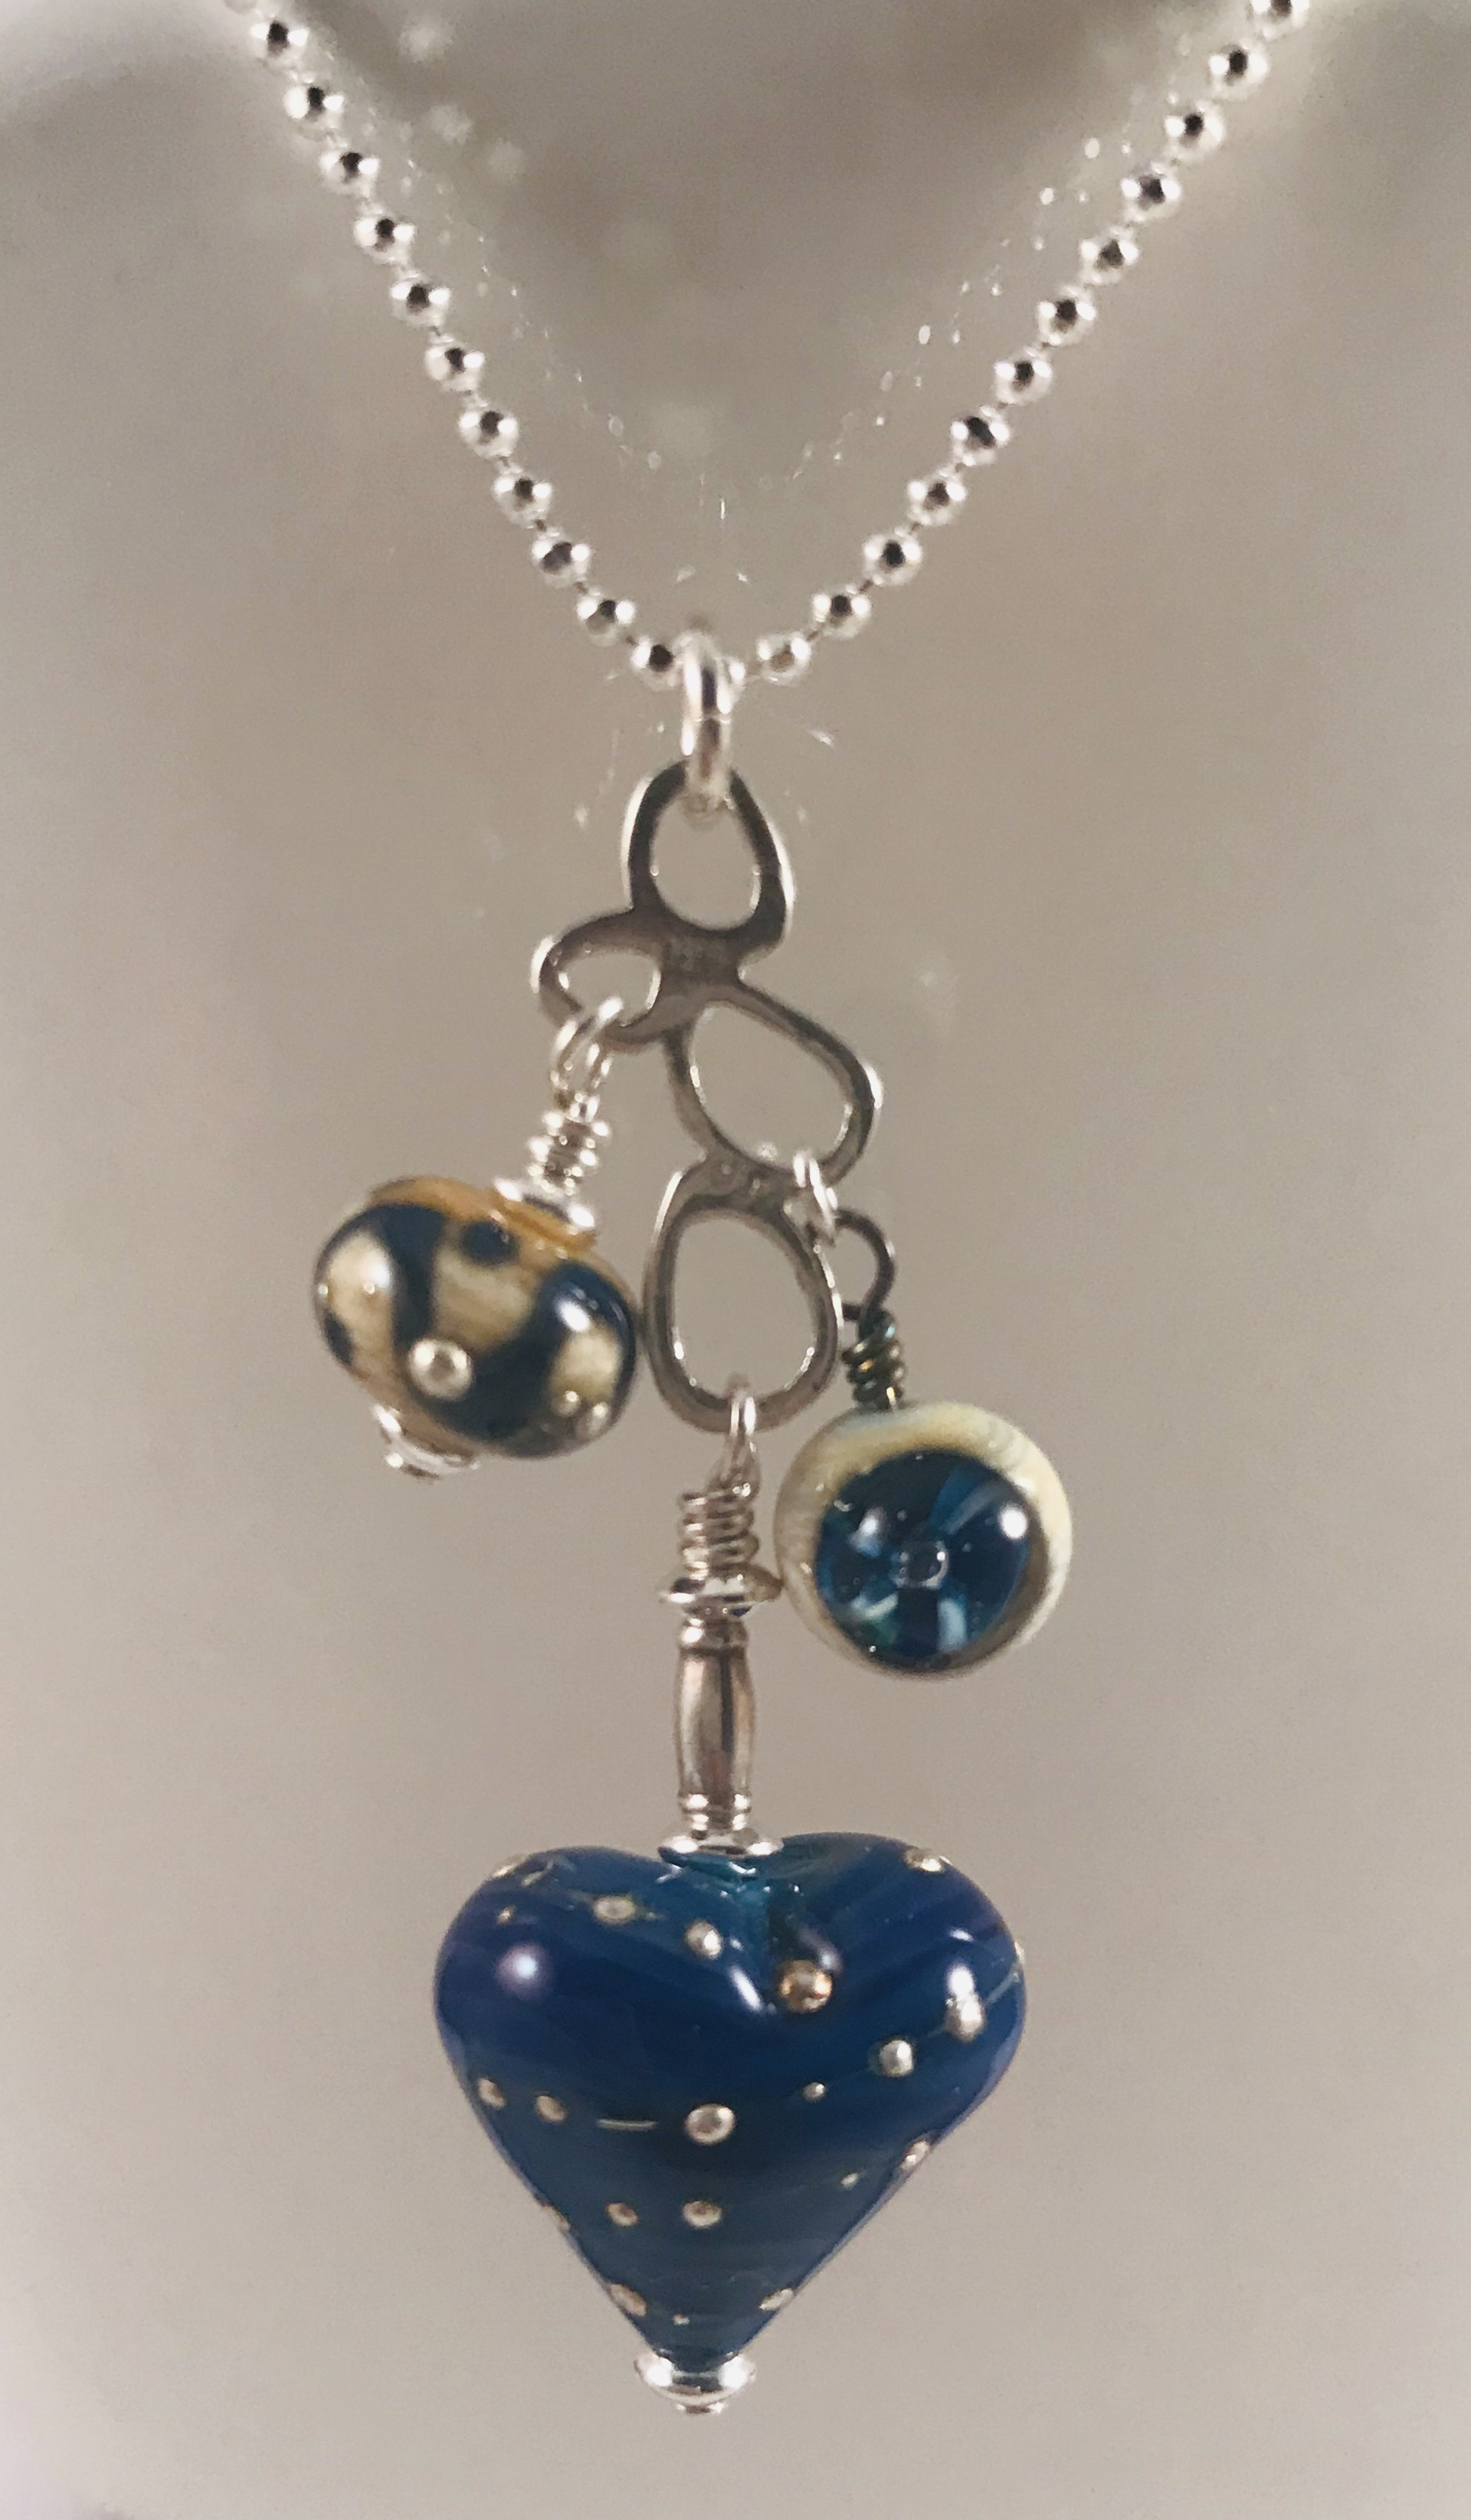 Blue Heart and Fine Silver Pendant, sterling silver chain by Linda Sacra